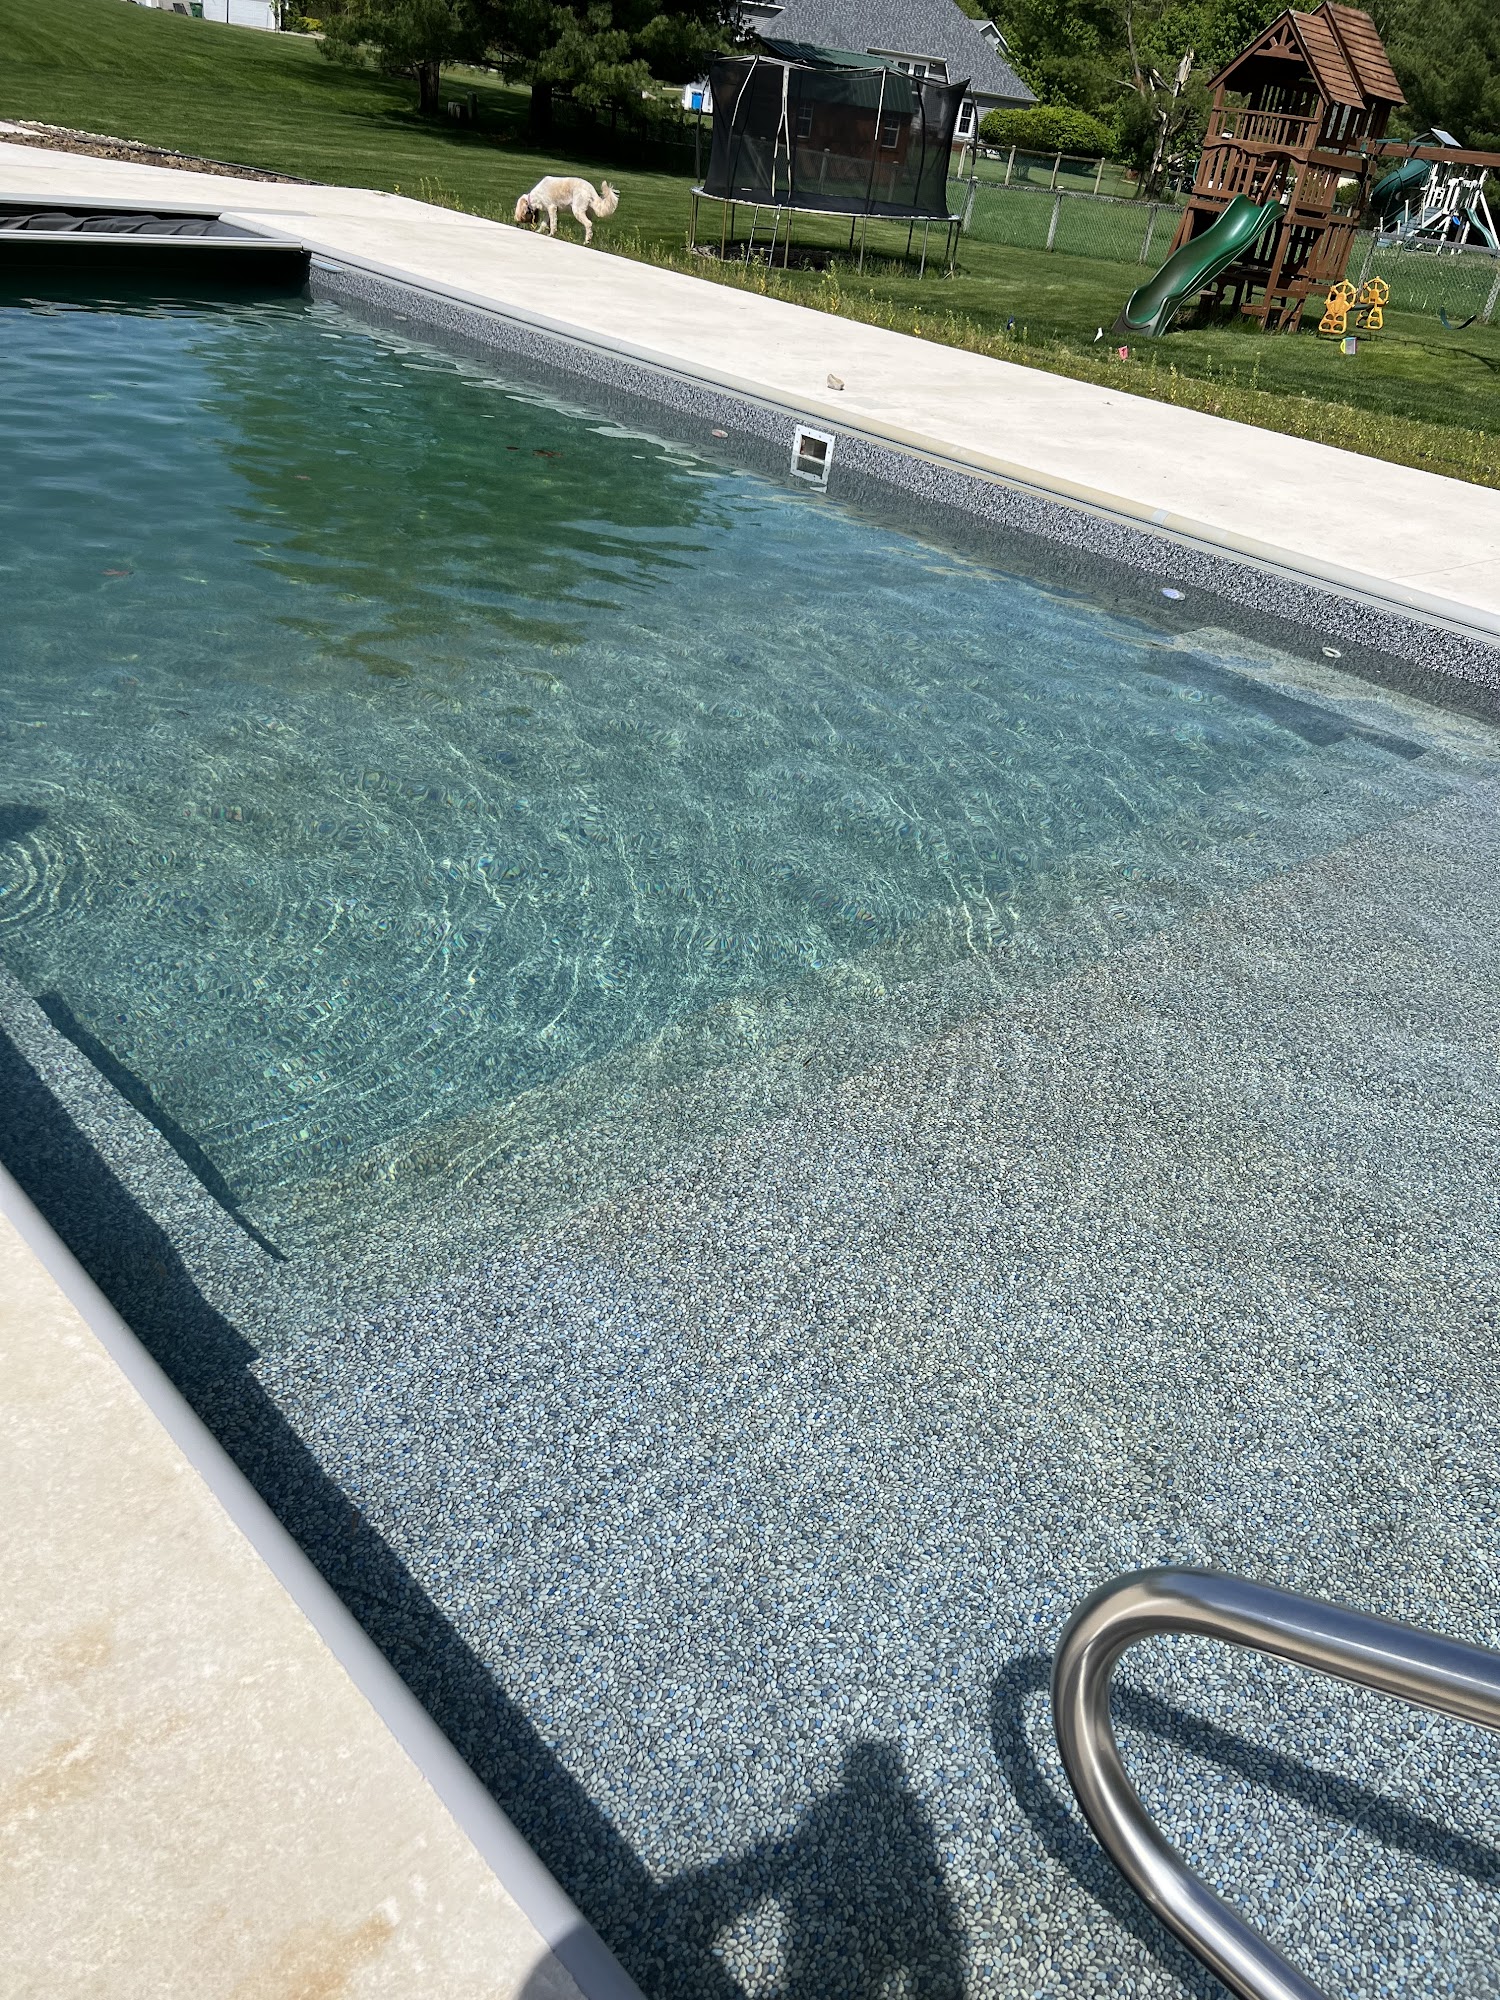 Complete pools and construction